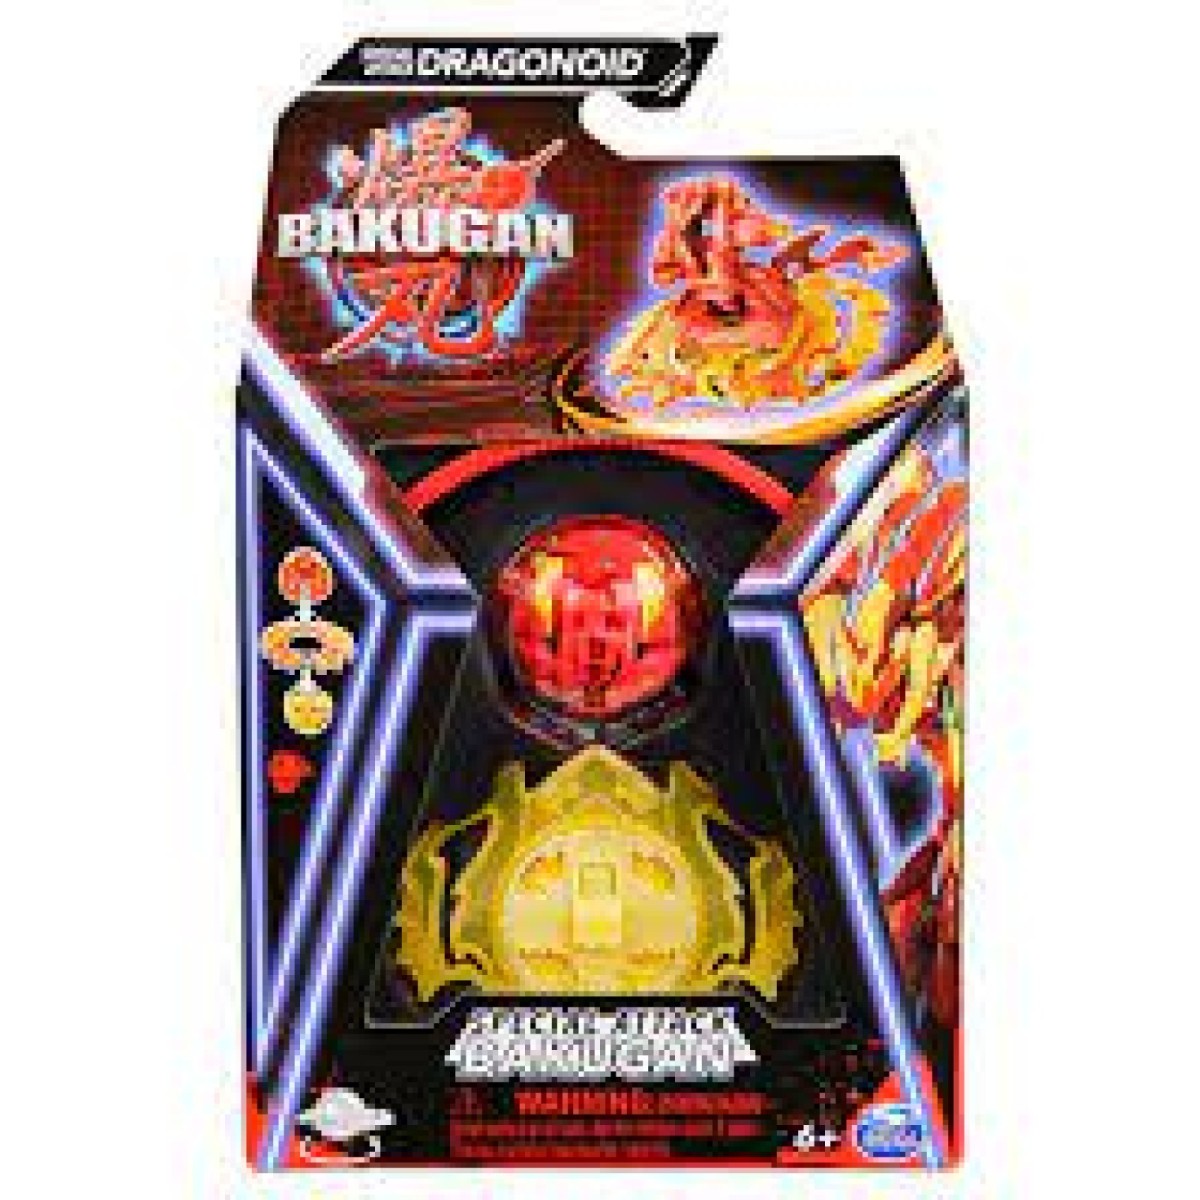 Bakugan 3.0 Battle Pack – 3 Balls, 2 Special Attack Balls, 2 Battle Rings,  1 Launcher Card and 12 Cards – Toy Collection – Children's Toy Age 6+